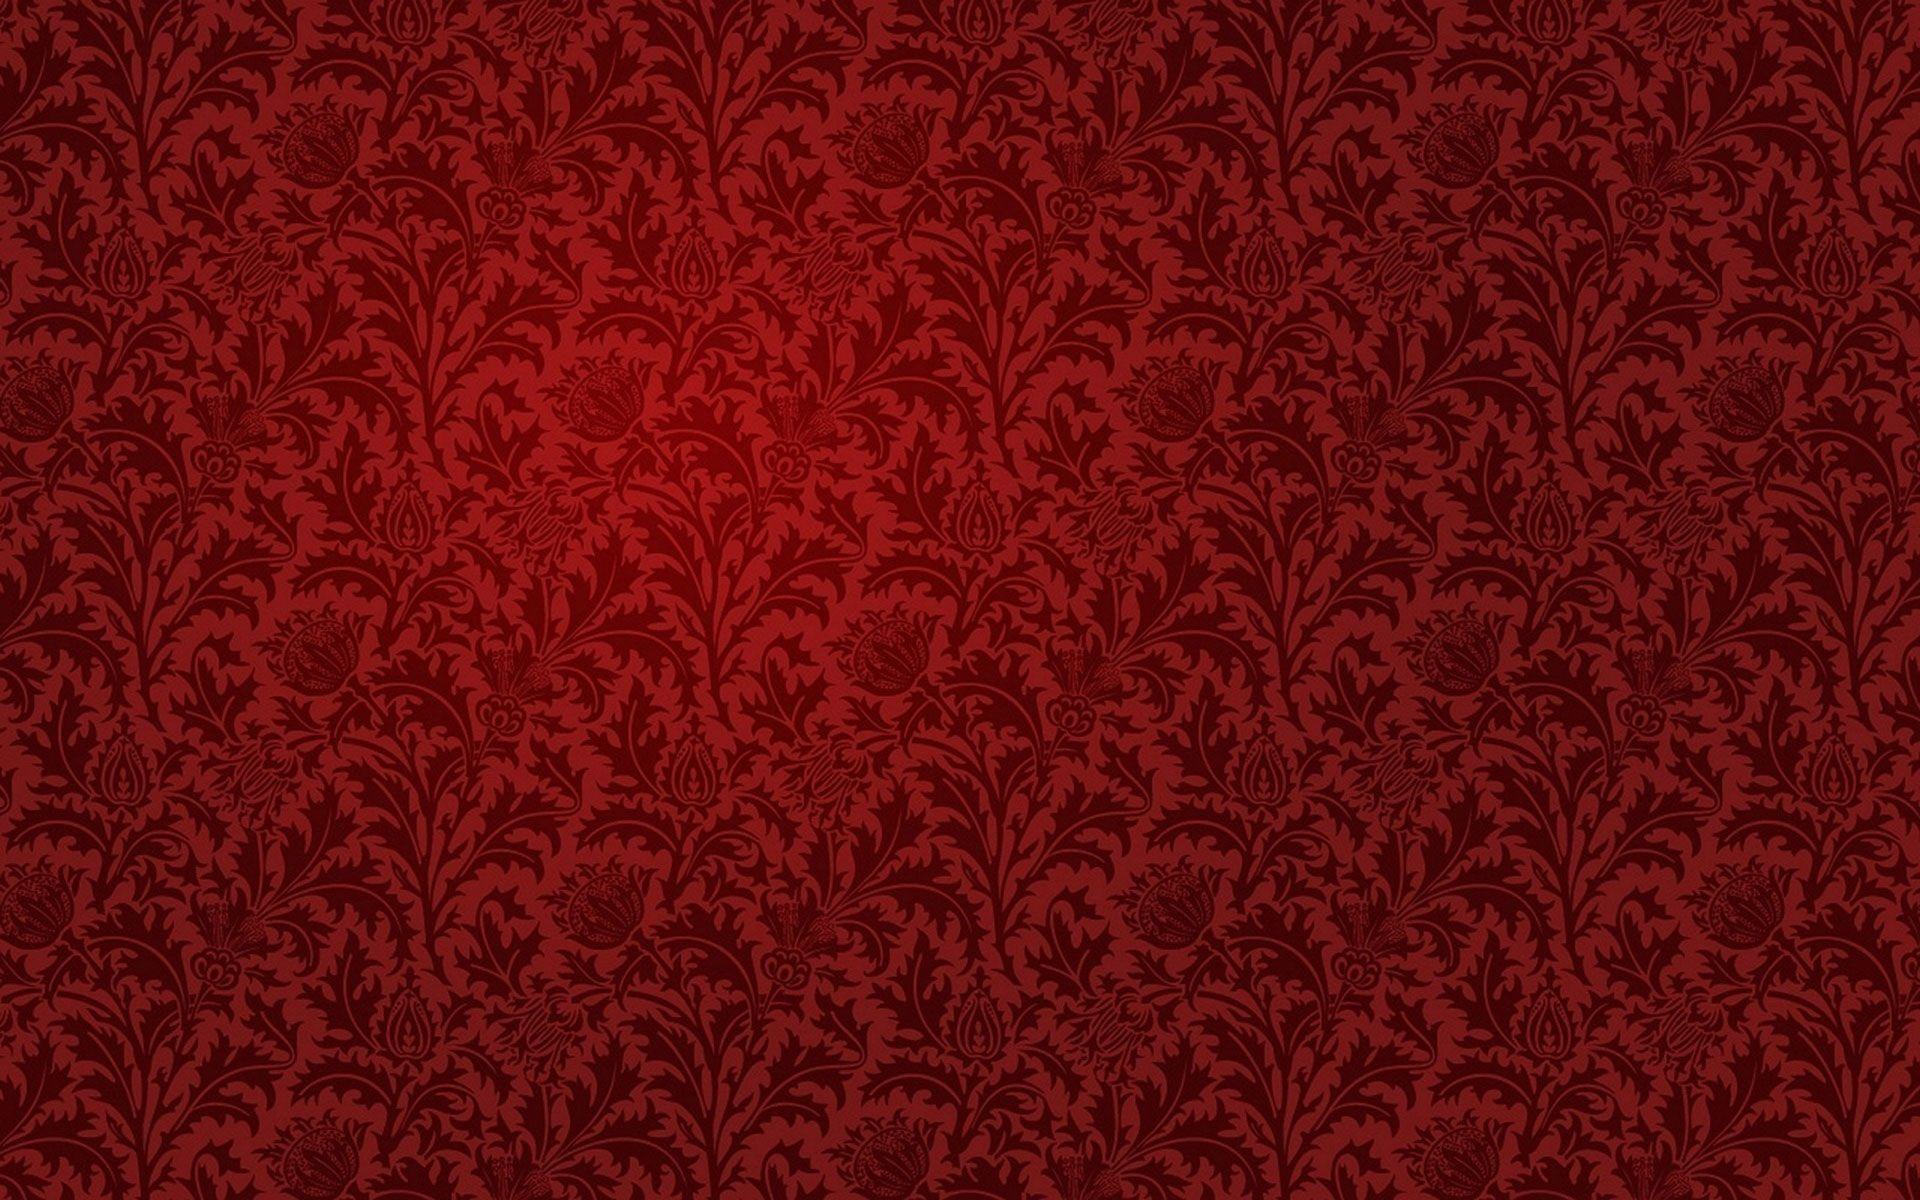 Beige and Red Rouge Abstract Fluid Pattern Design  by patternsoup  Iphone  background wallpaper Cute patterns wallpaper Phone wallpaper patterns